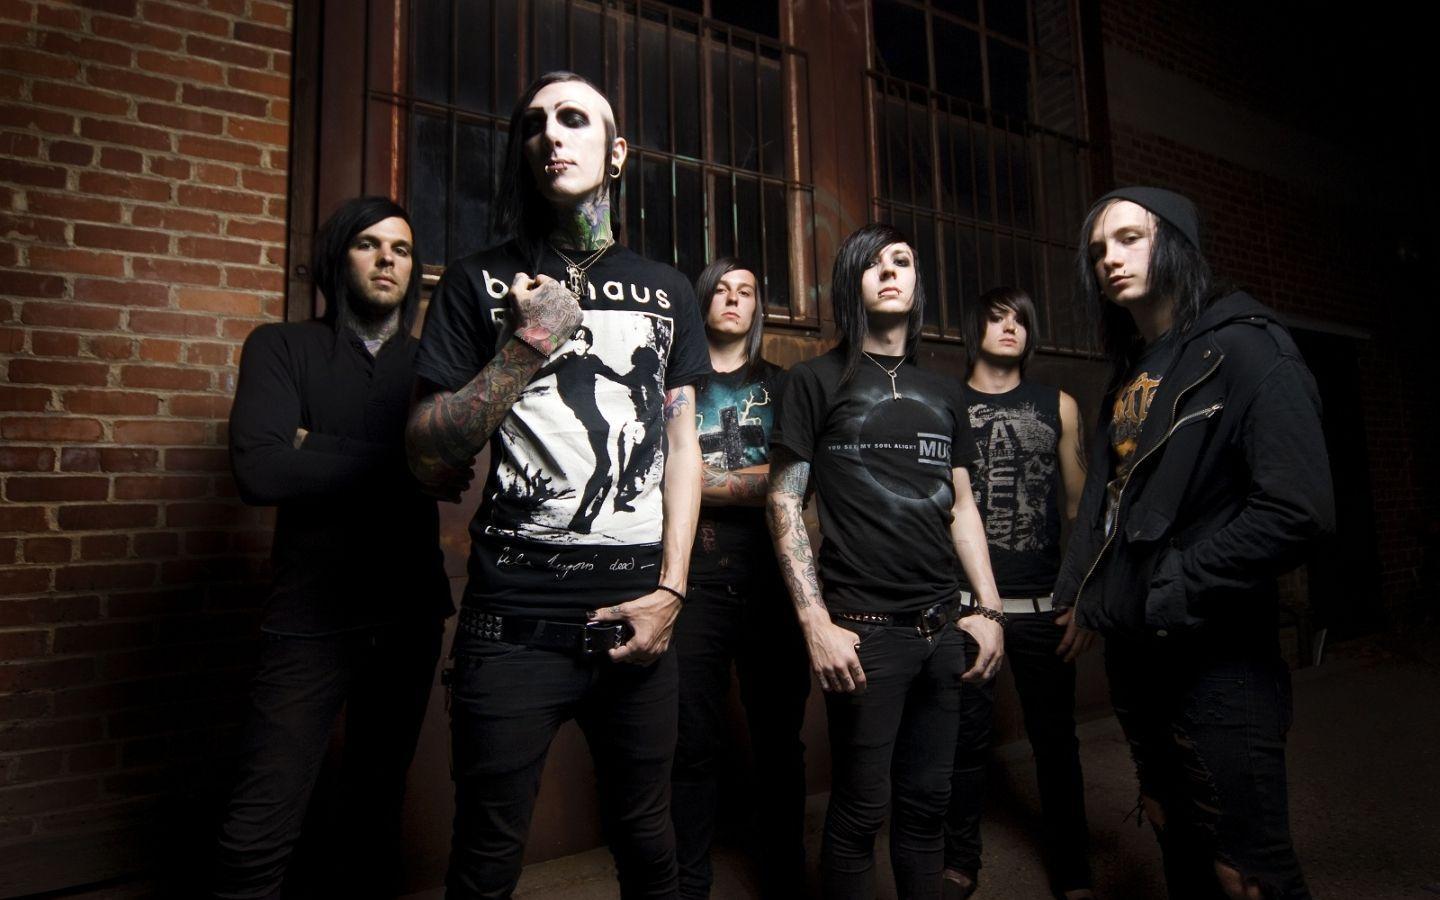 Motionless In White Wallpapers - Wallpaper Cave